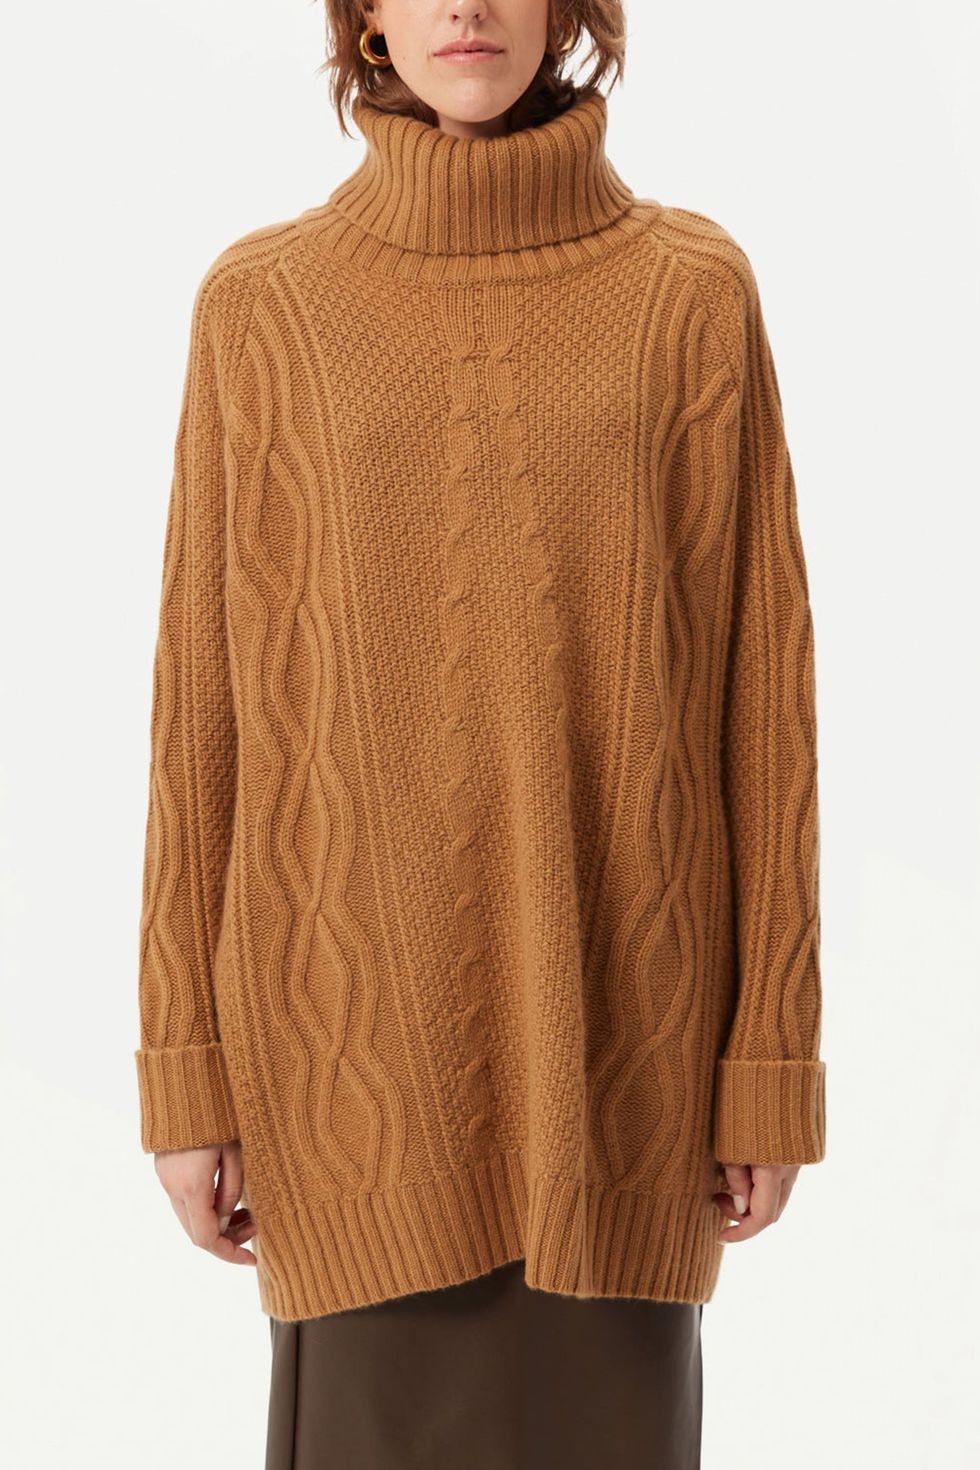 10 Comfy and you Sweaters need Wardrobe Cozy in your